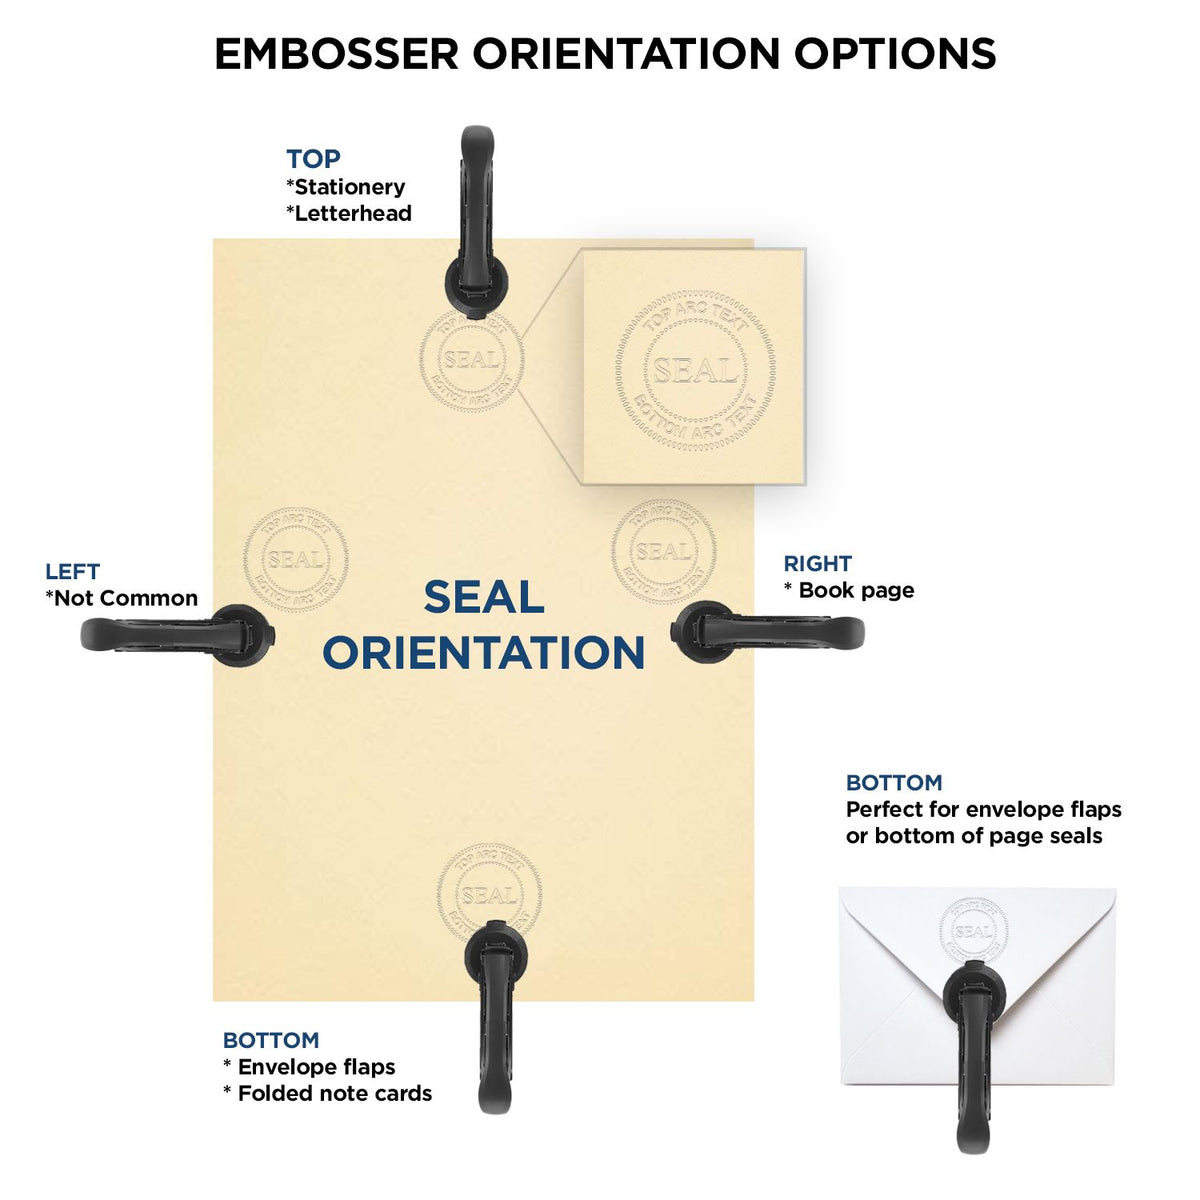 An infographic for the State of Nevada Long Reach Architectural Embossing Seal showing embosser orientation, this is showing examples of a top, bottom, right and left insert.